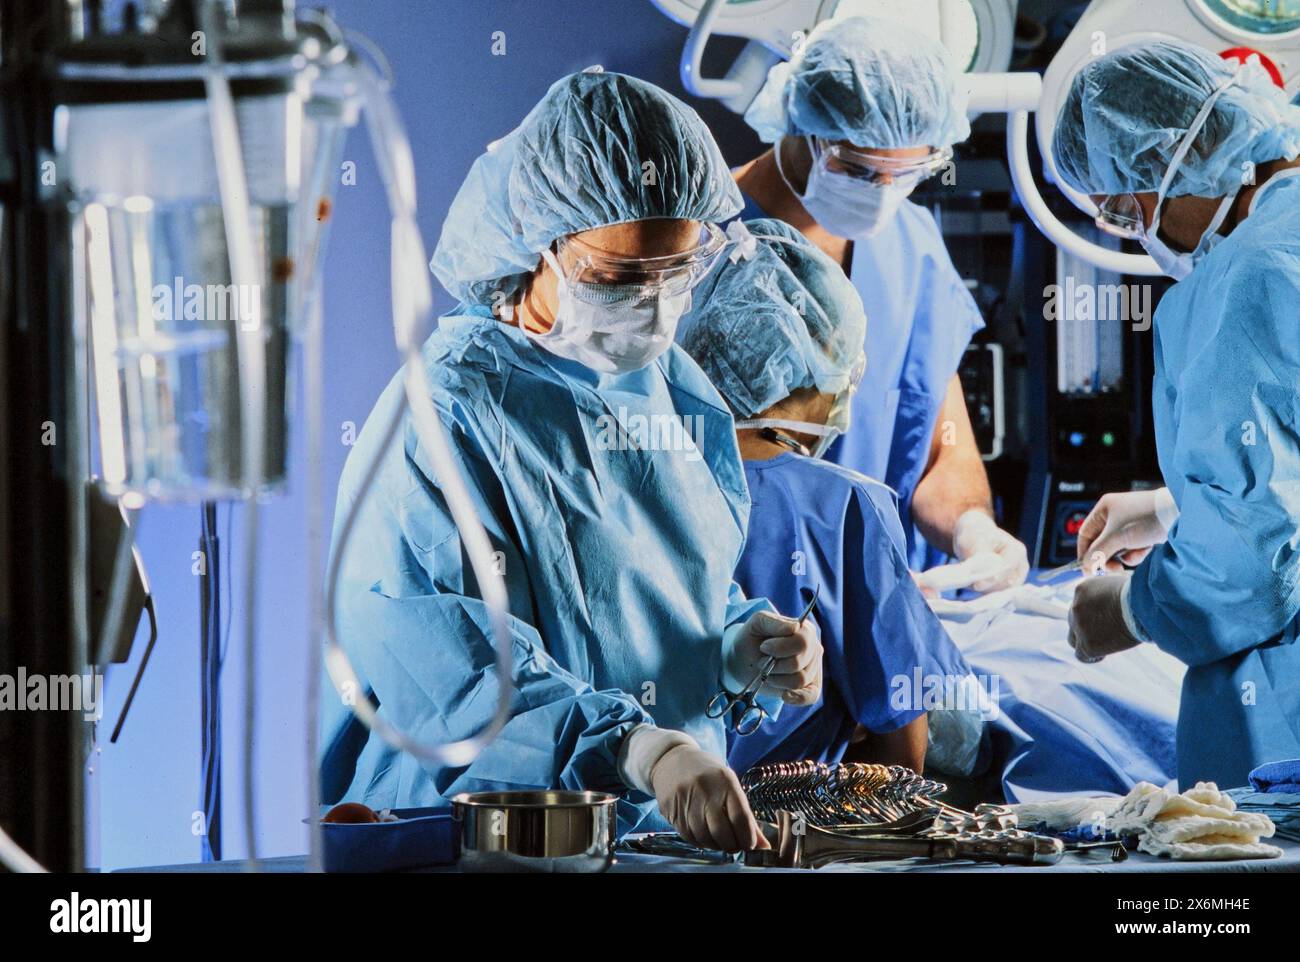 A group of highly skilled surgeons in scrubs and masks are working diligently in an operating room, performing a complex surgical procedure on a patie Stock Photo